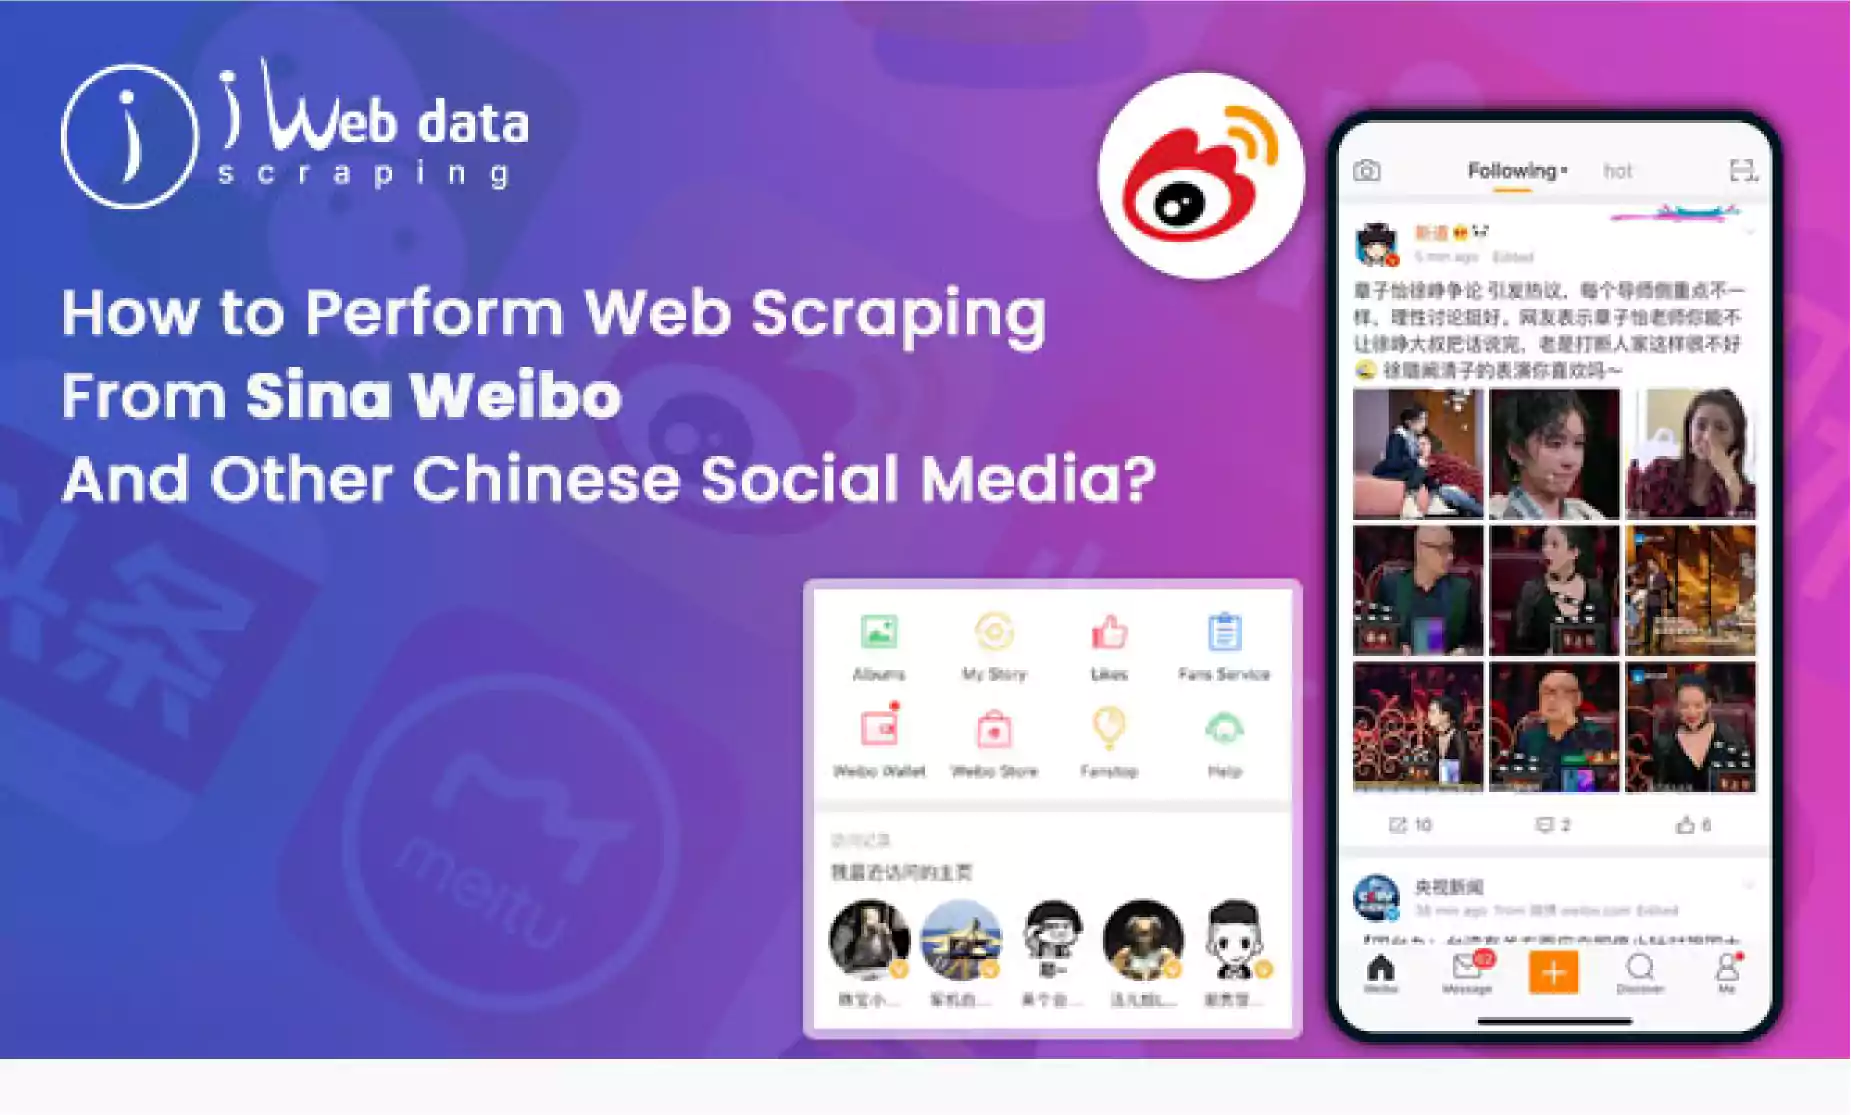 Thumb-How-to-Perform-Web-Scraping-from-Sina-Weibo-and-other-Chinese-Social-Media.jpg